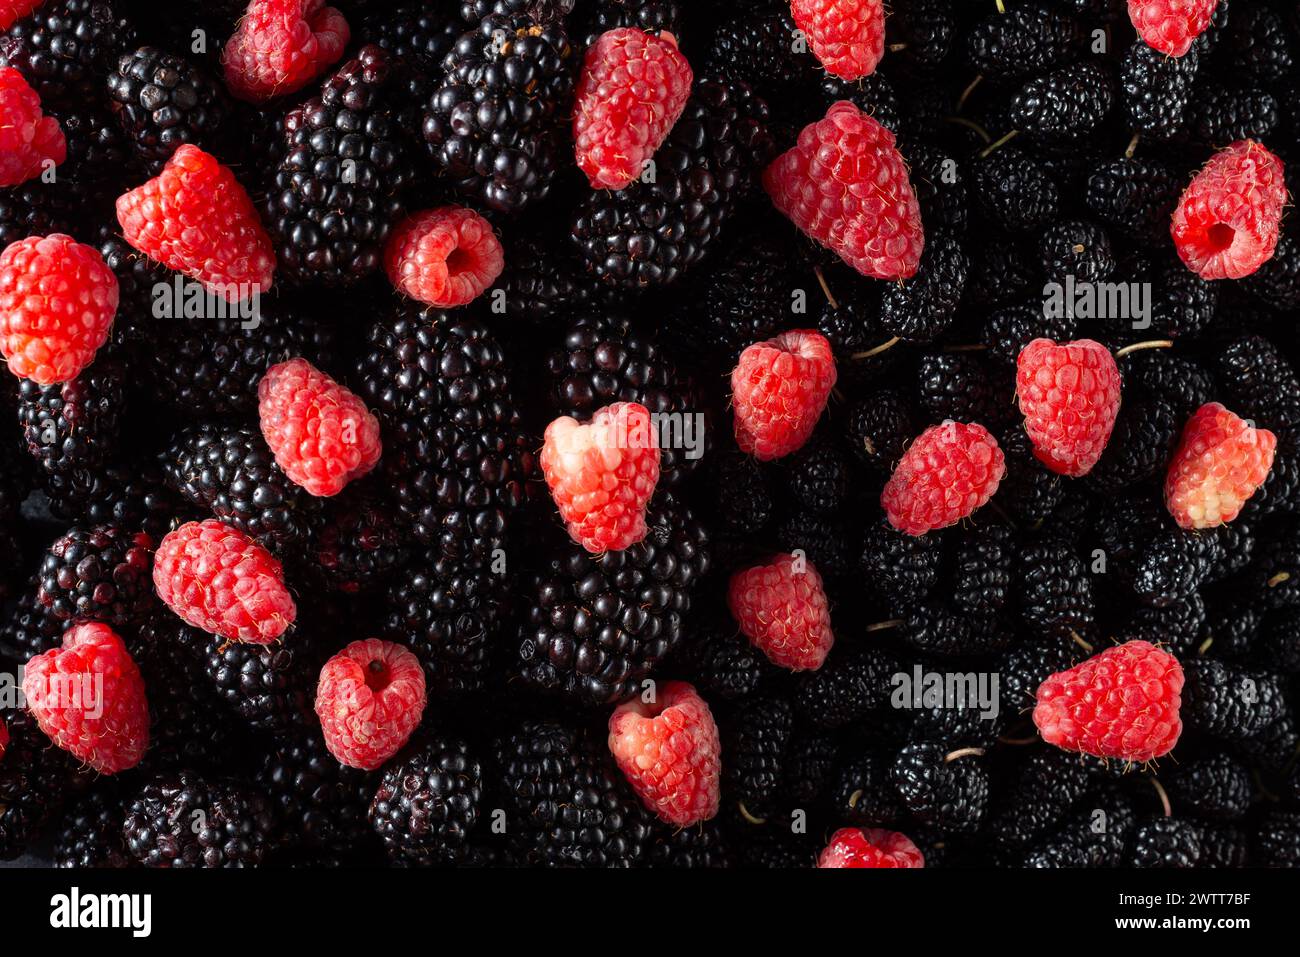 texture of black and red berries fresh fruit blueberries and raspberries. Stock Photo